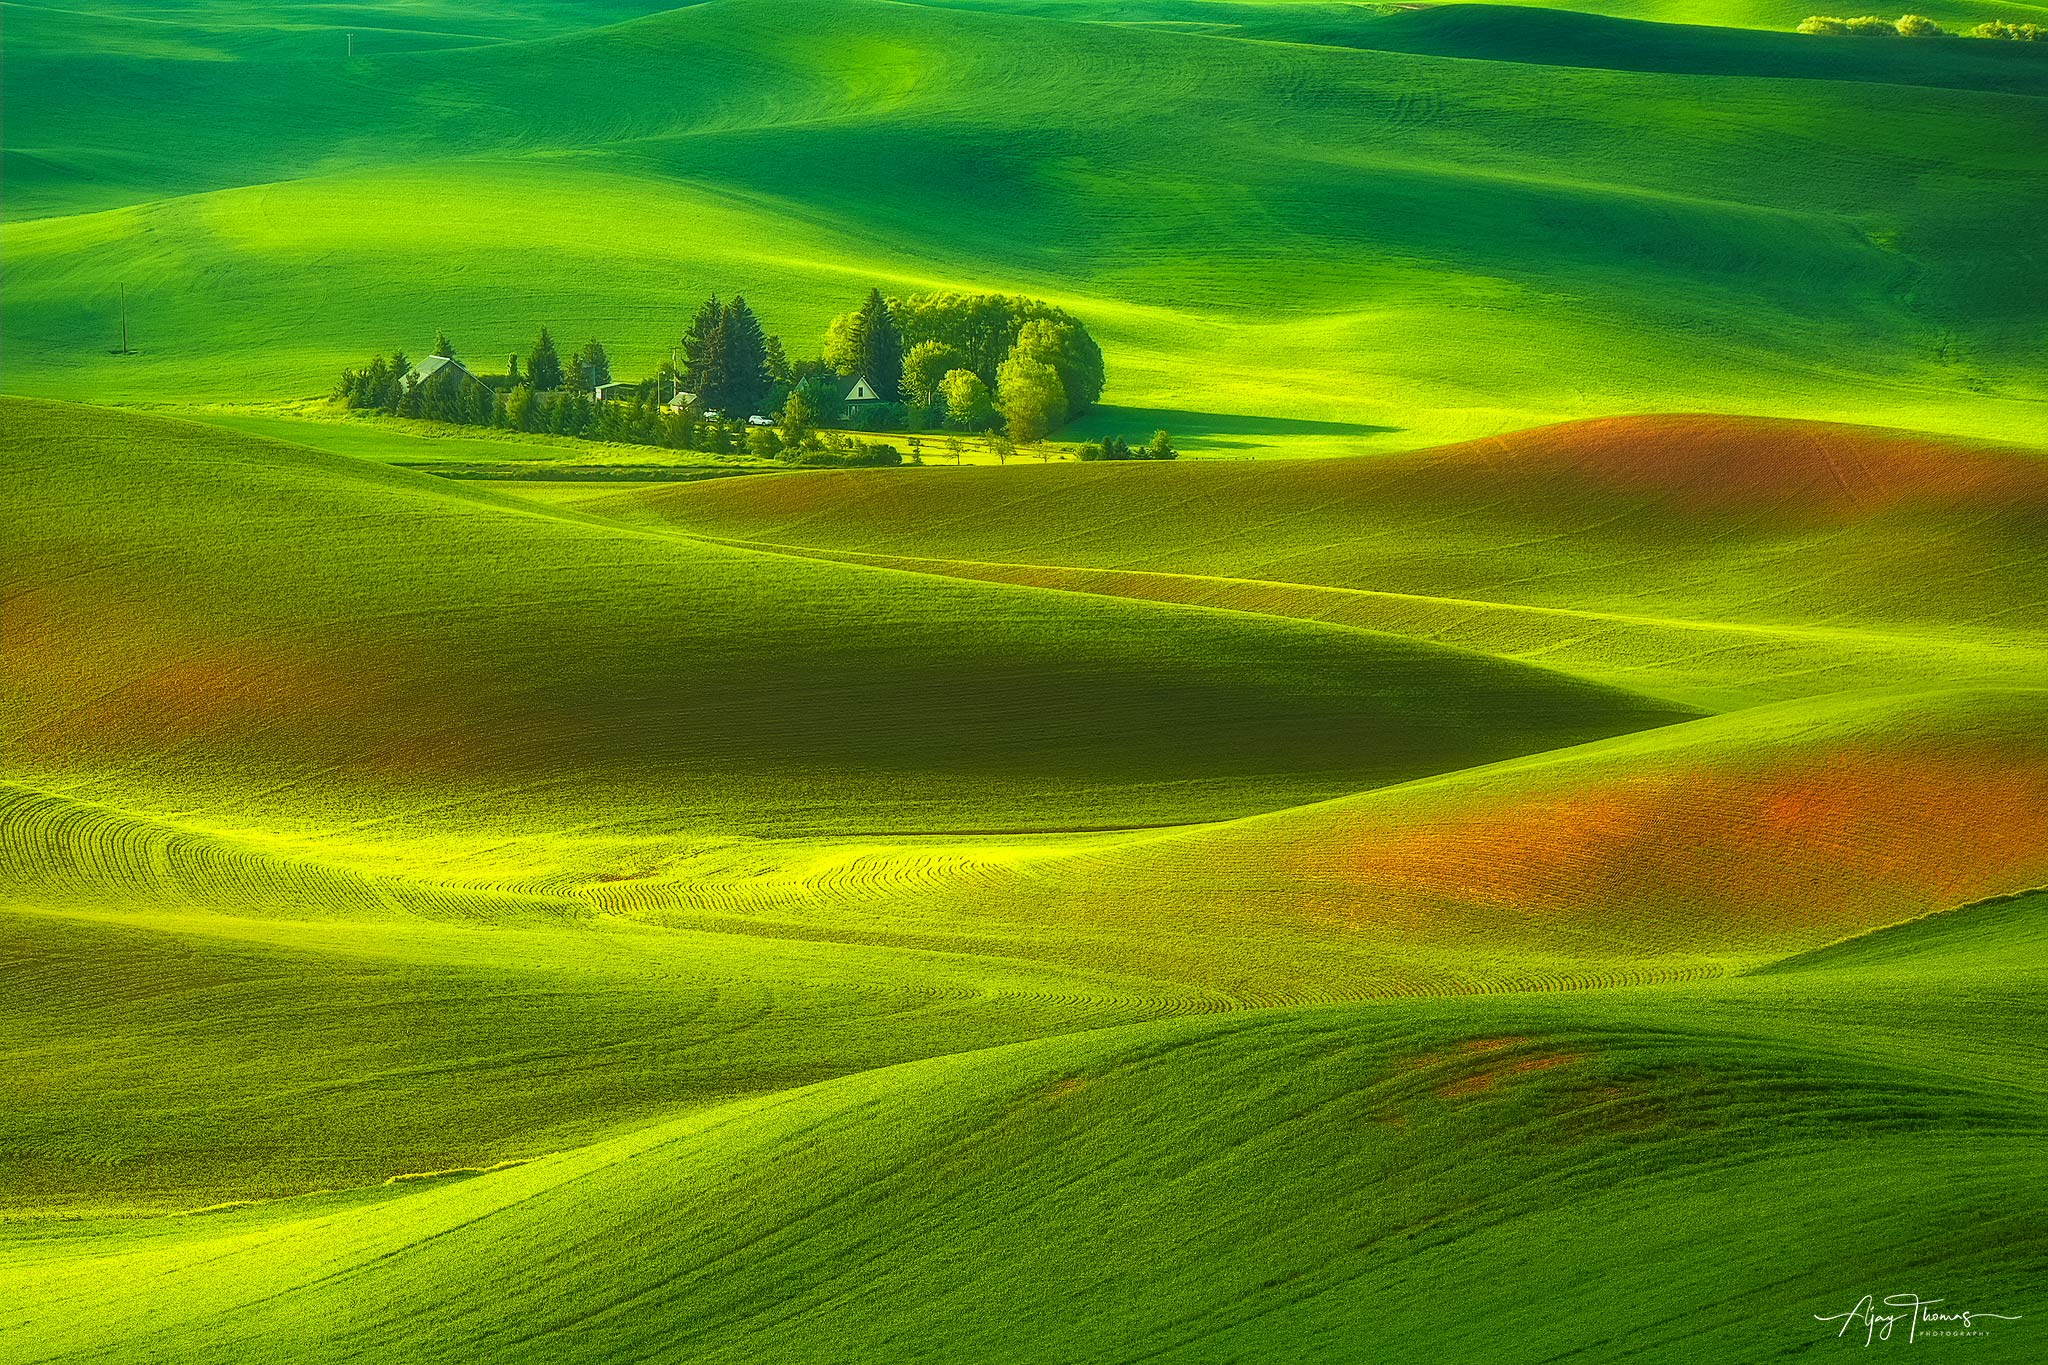 Somewhere around late June to early July in Palouse, the greens will begin transitioning into the warmer golds and browns of...